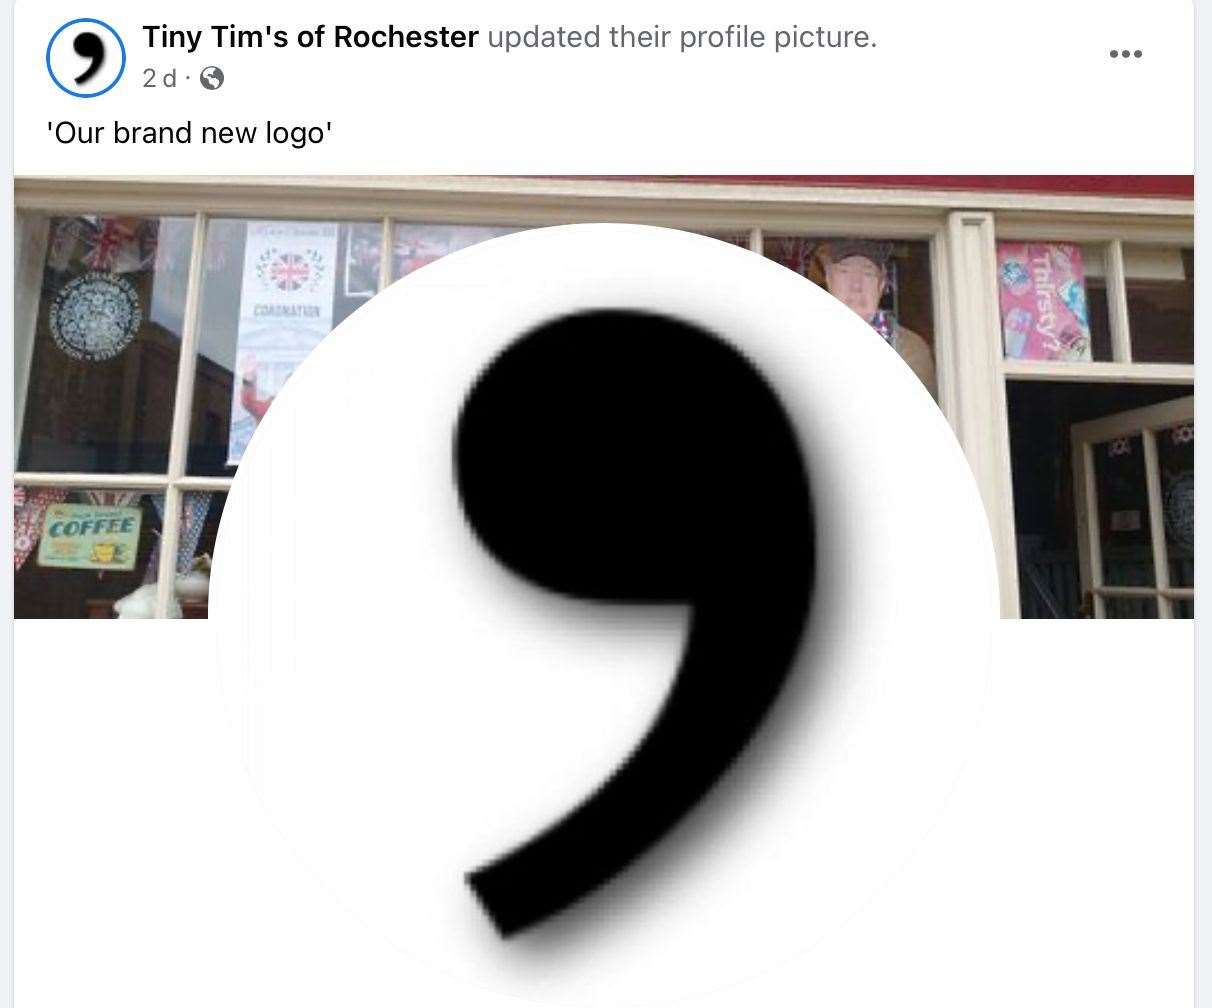 They also changed their logo to an apostrophe in response. Picture: Tiny Tim's of Rochester Facebook